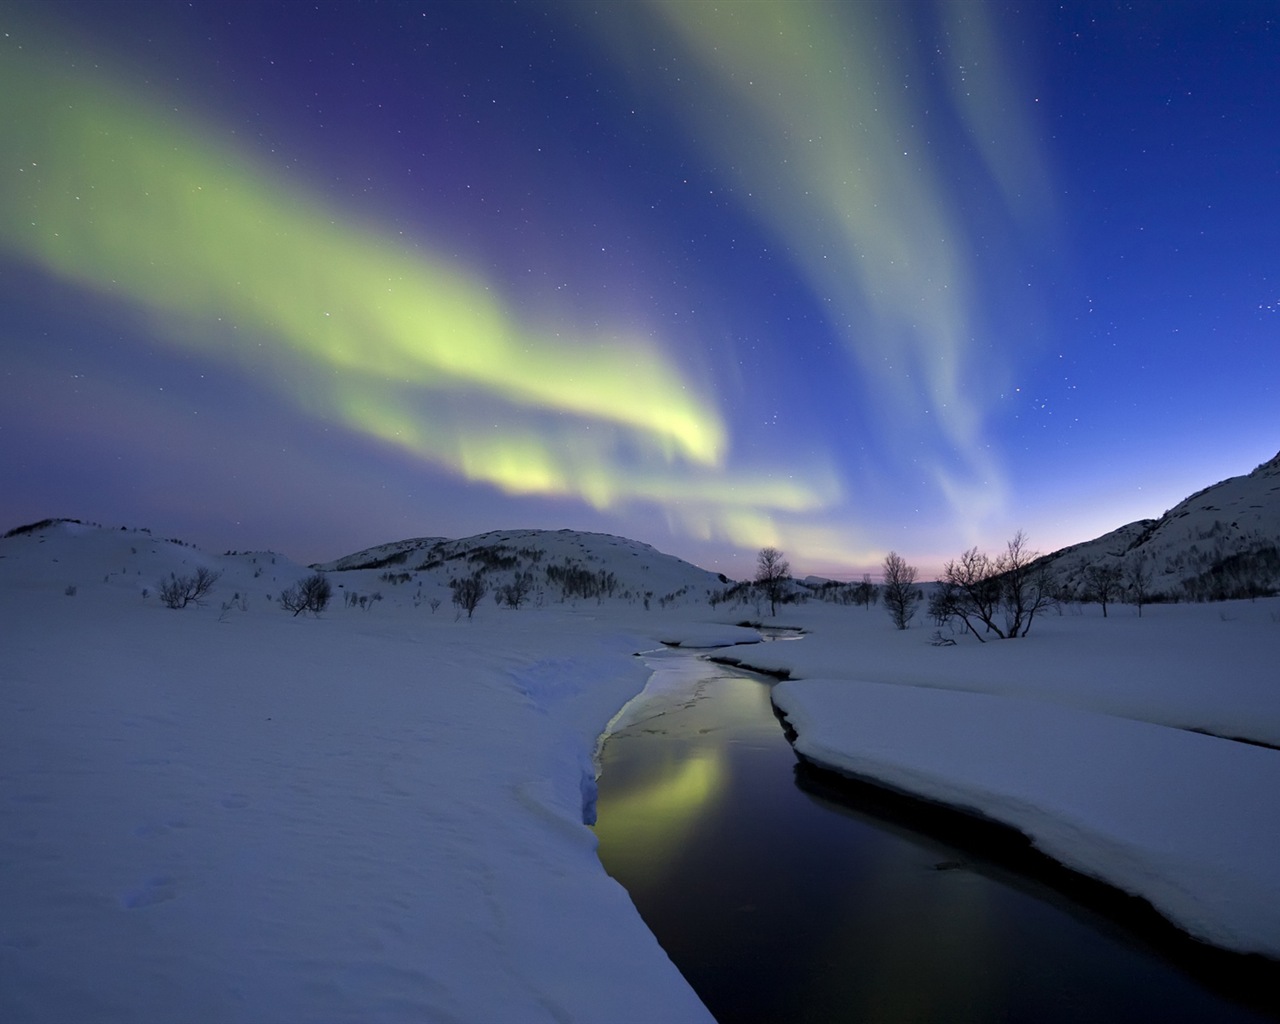 Natural wonders of the Northern Lights HD Wallpaper (2) #19 - 1280x1024